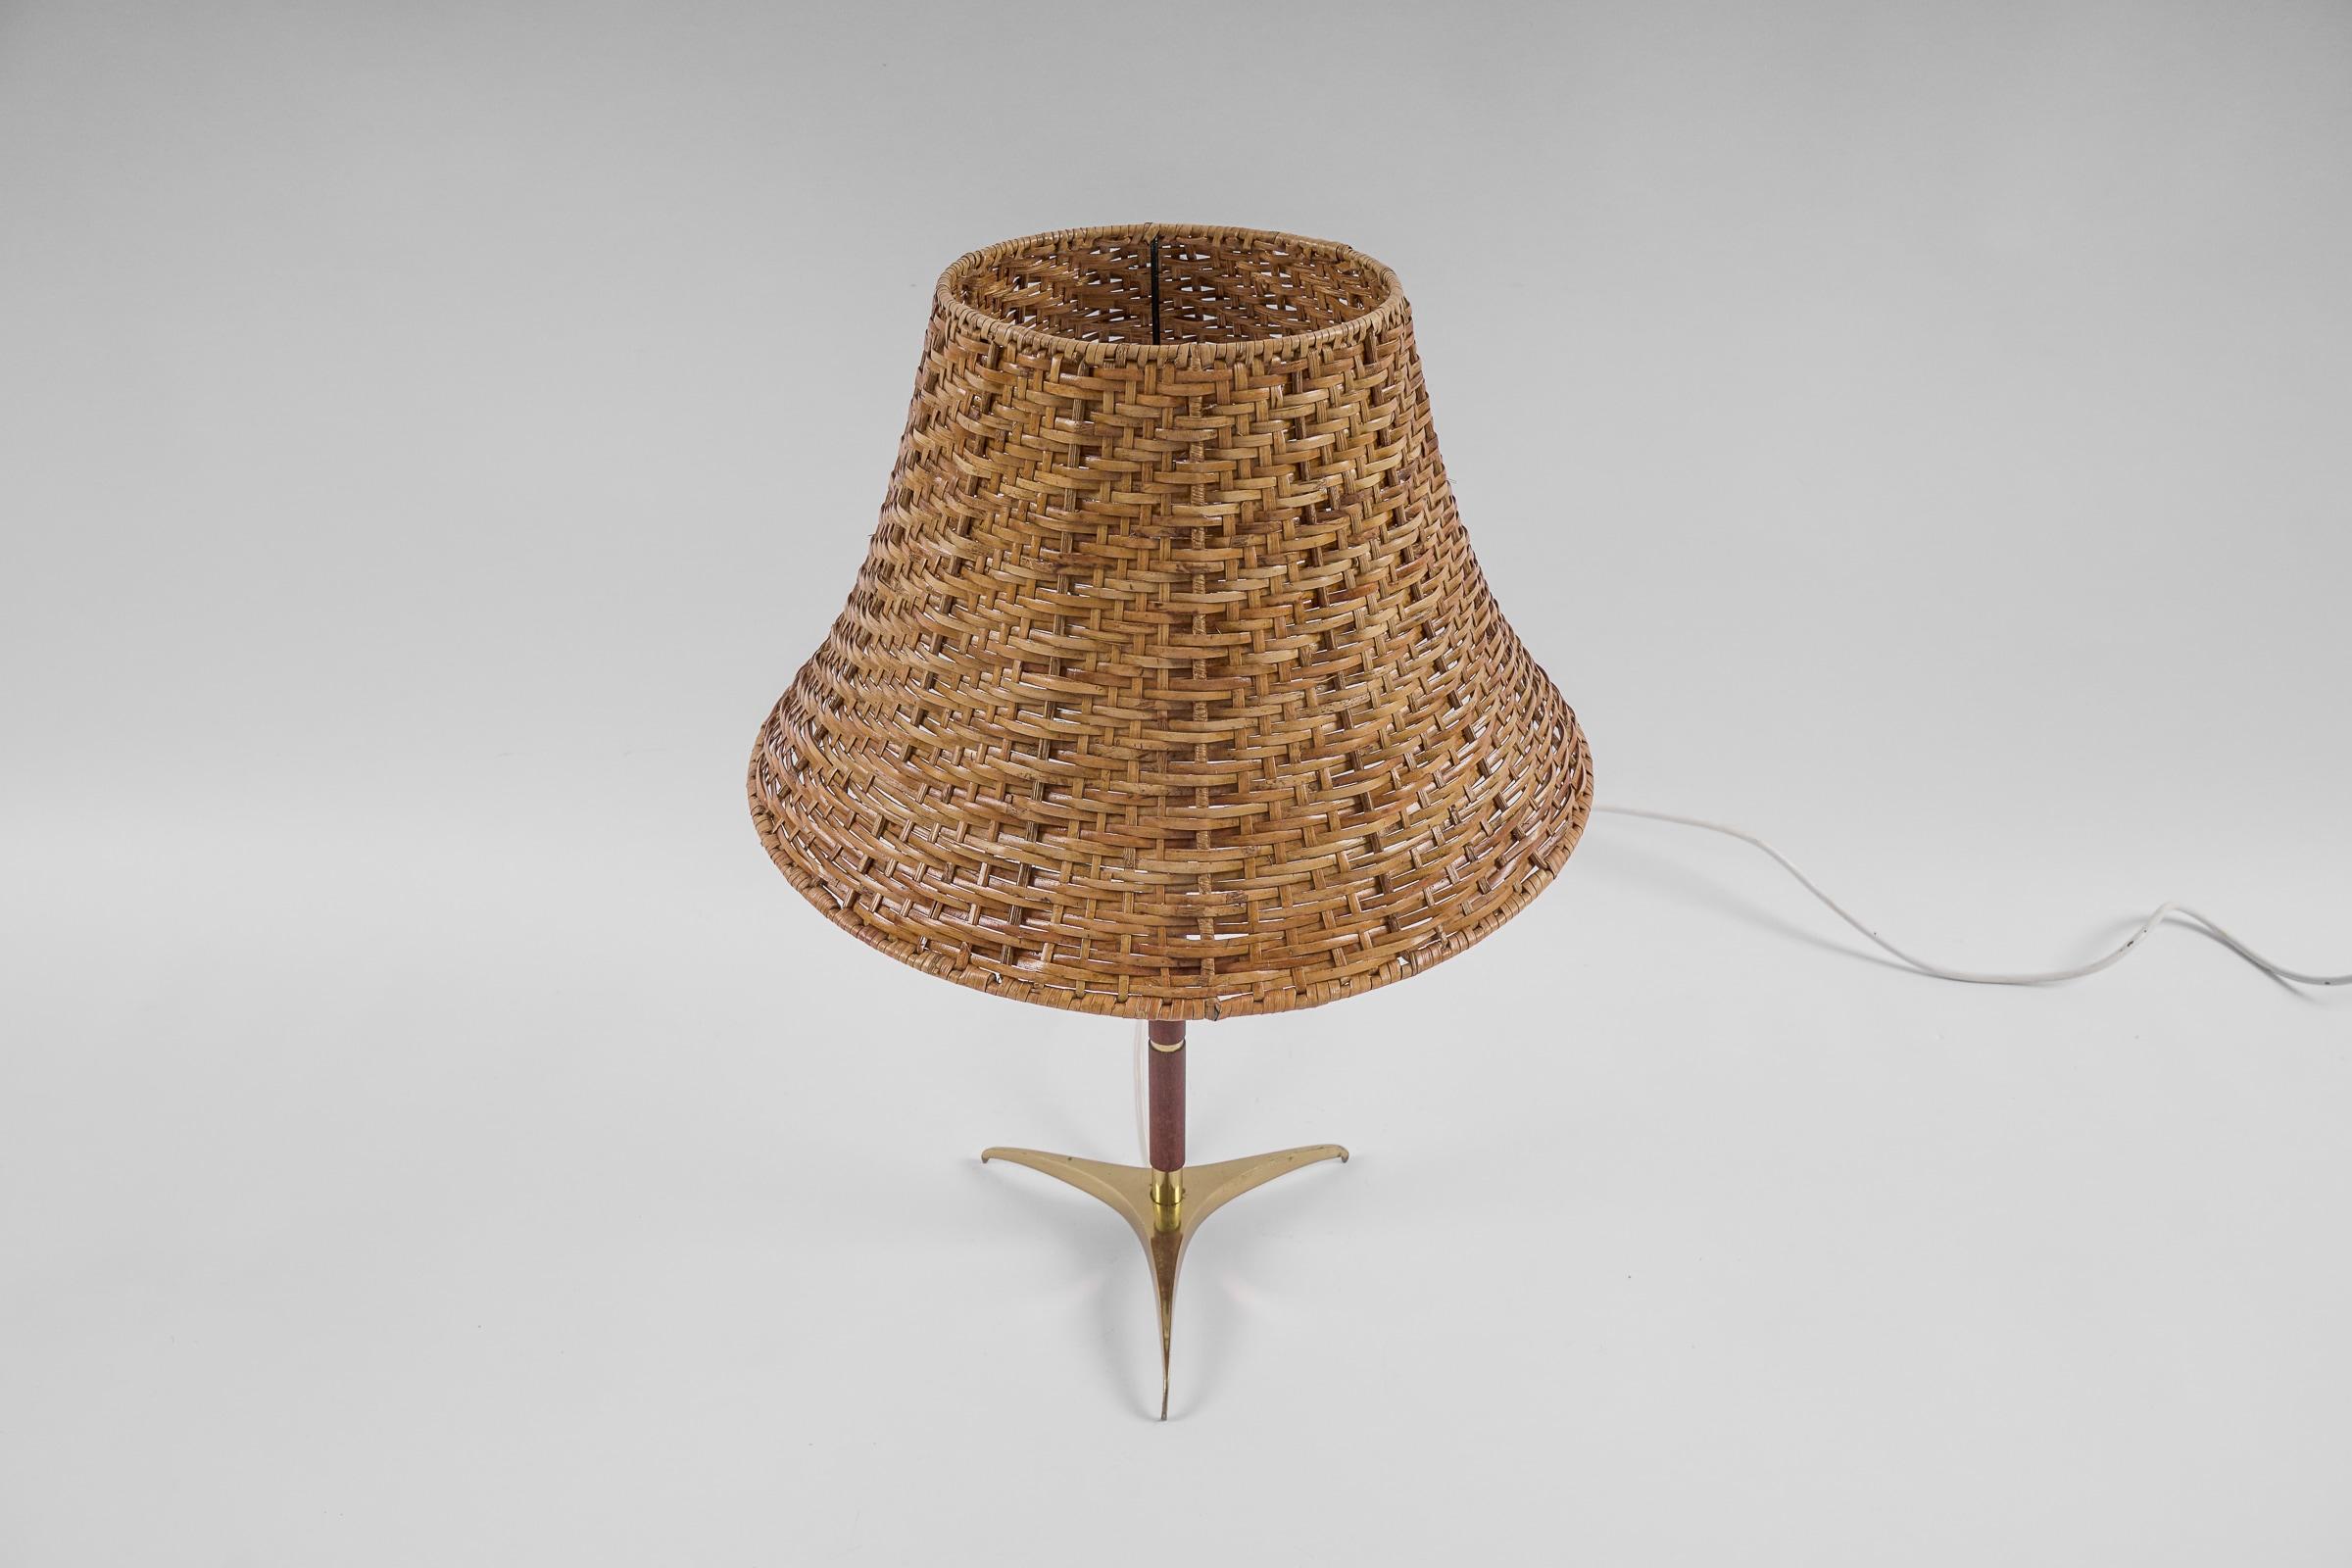 Lovely Mid-Century Modern Table Lamp in Brass, Wicker and Teak, 1950s, Austria For Sale 1